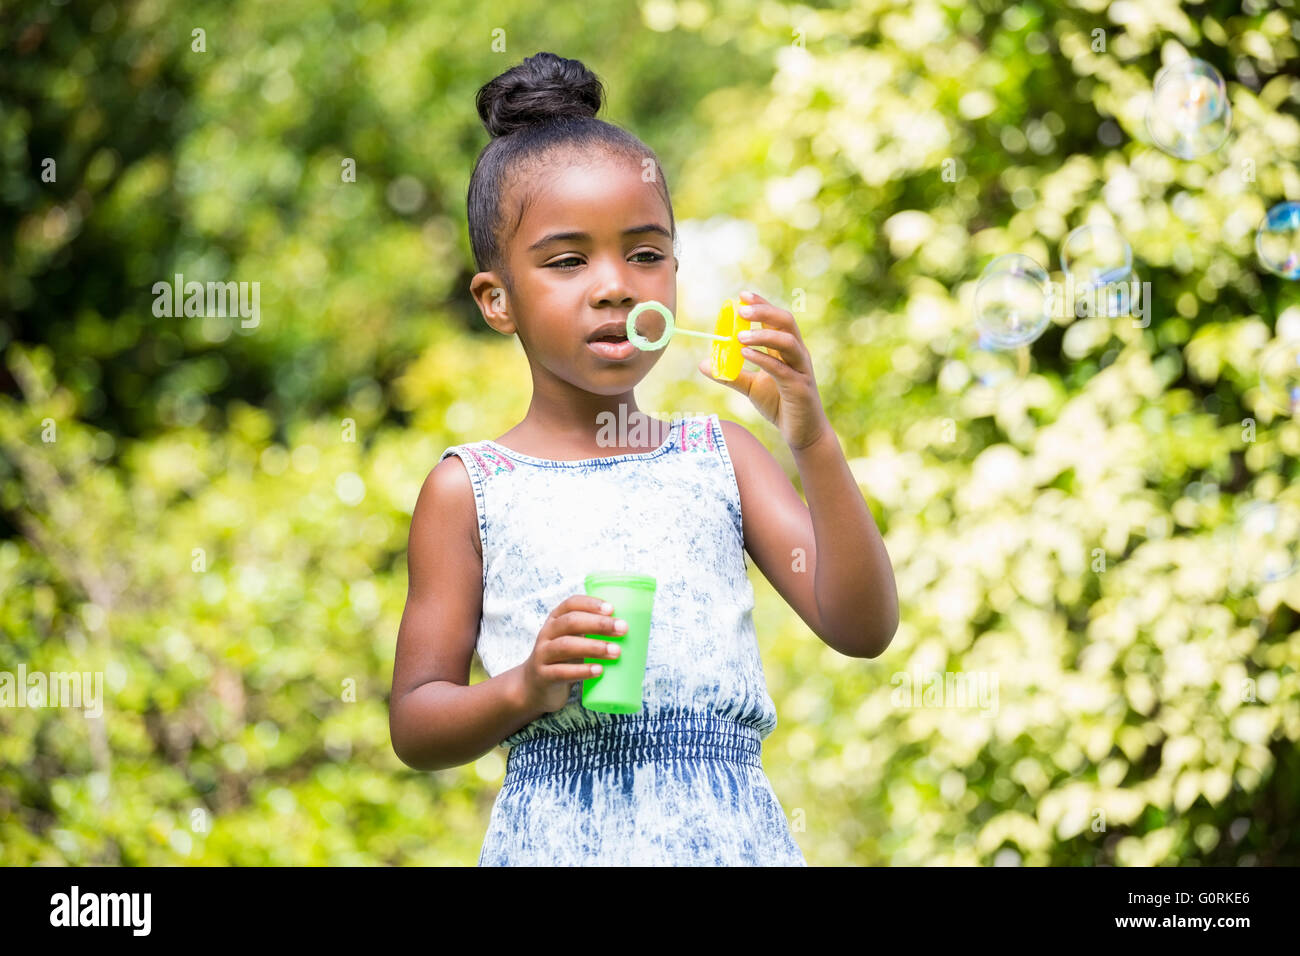 Little girl making bubble at park Stock Photo